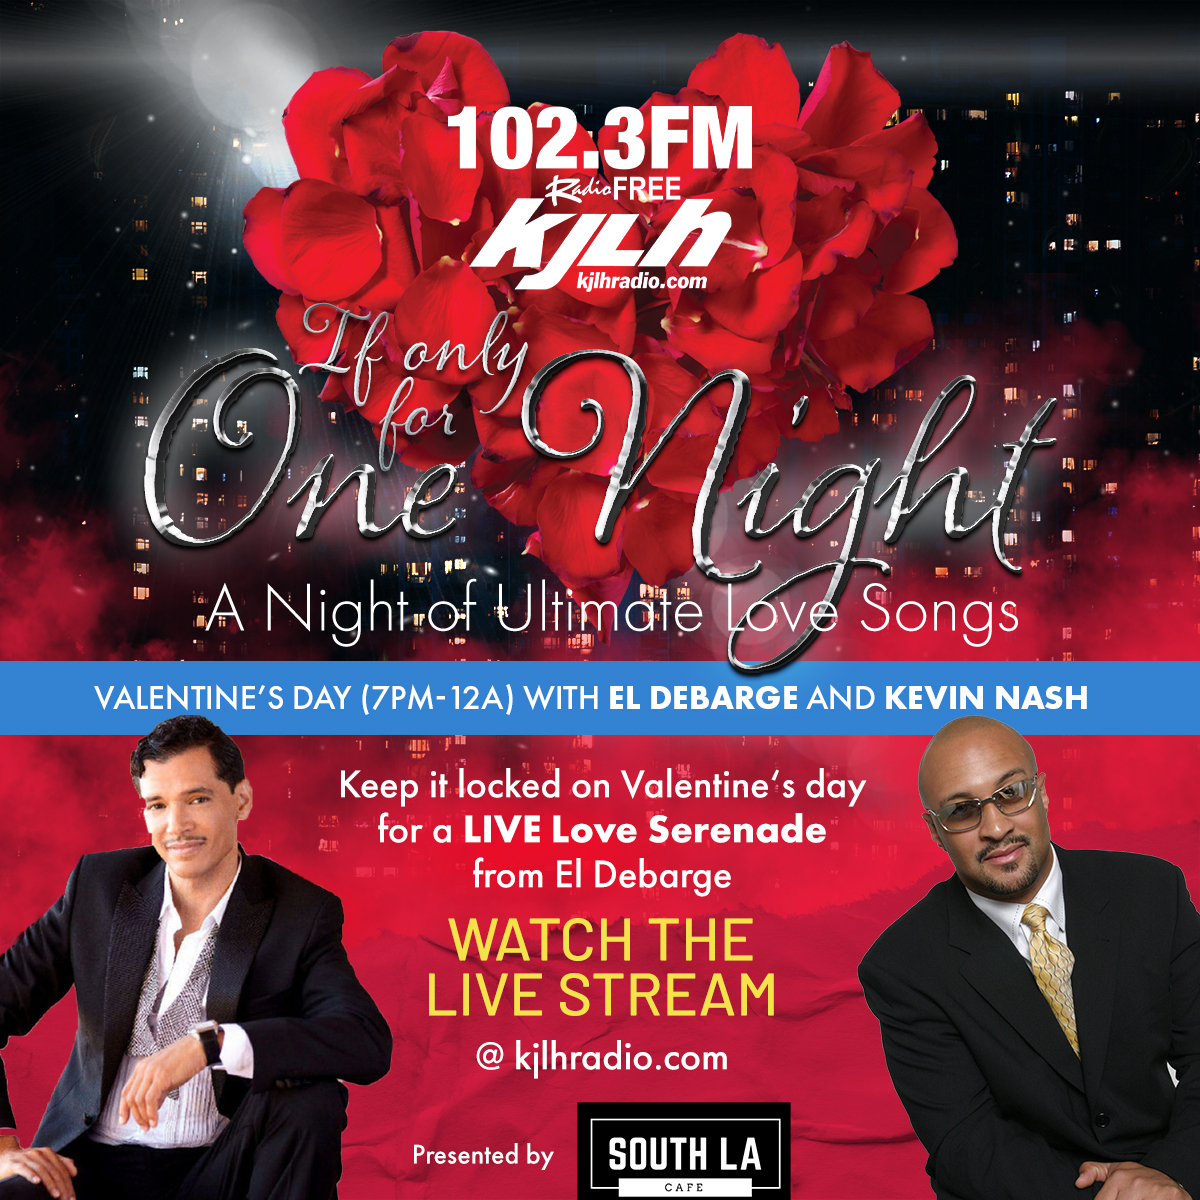 Valentines Day: A Night of Ultimate Love Songs with El Debarge and Kevin Nash